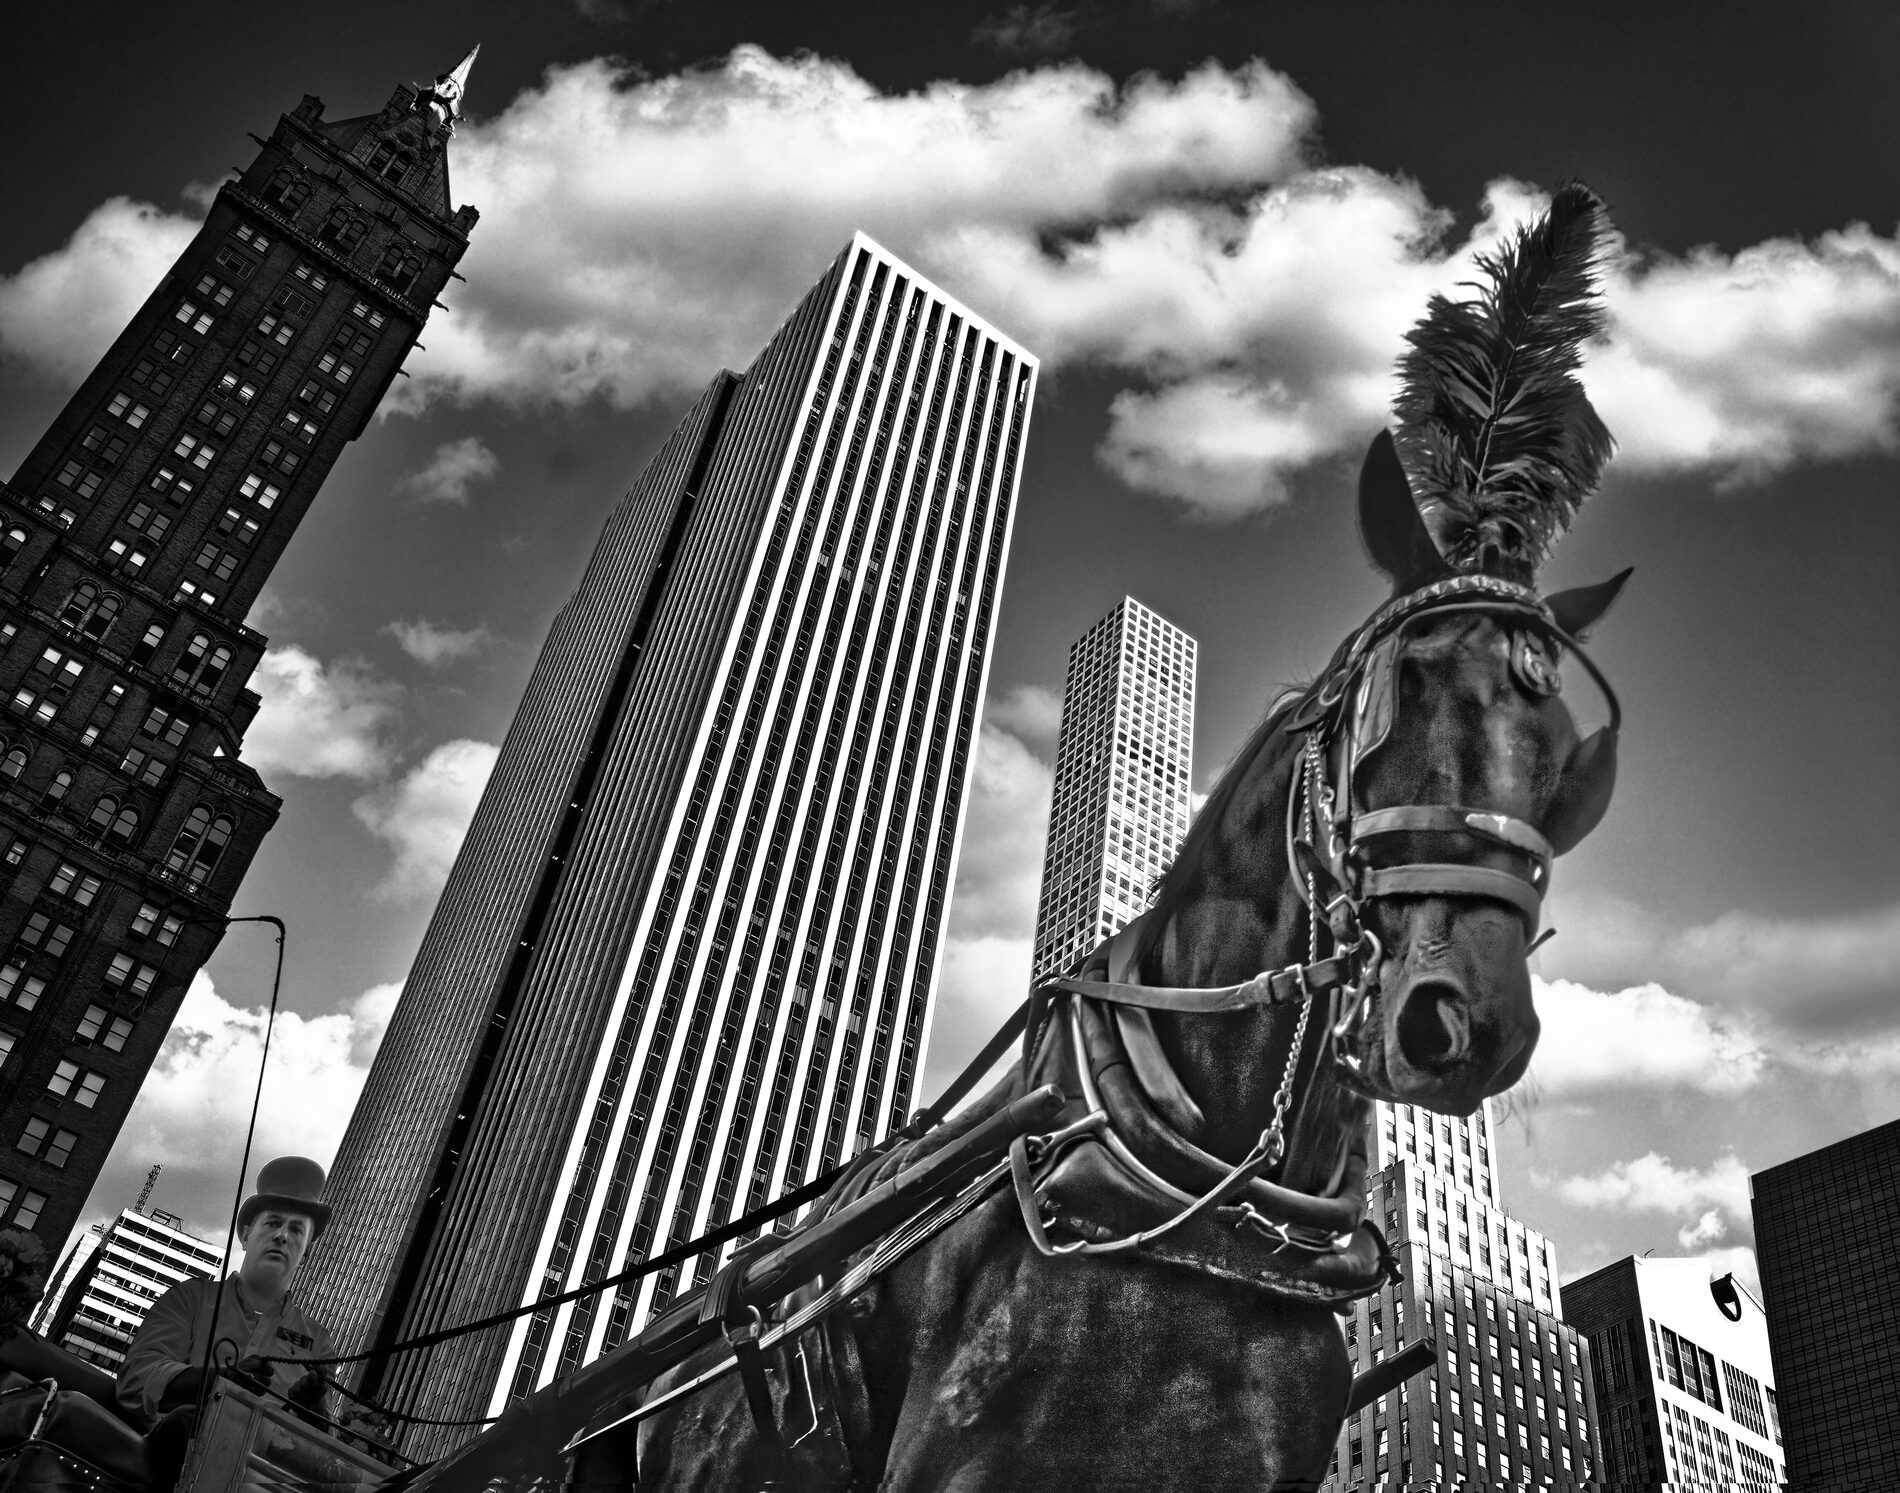 Black and white: looking up on a horse with a feather piece on its head, drawing a carriage driven by a man in a top hat in a city with skyscrapers.